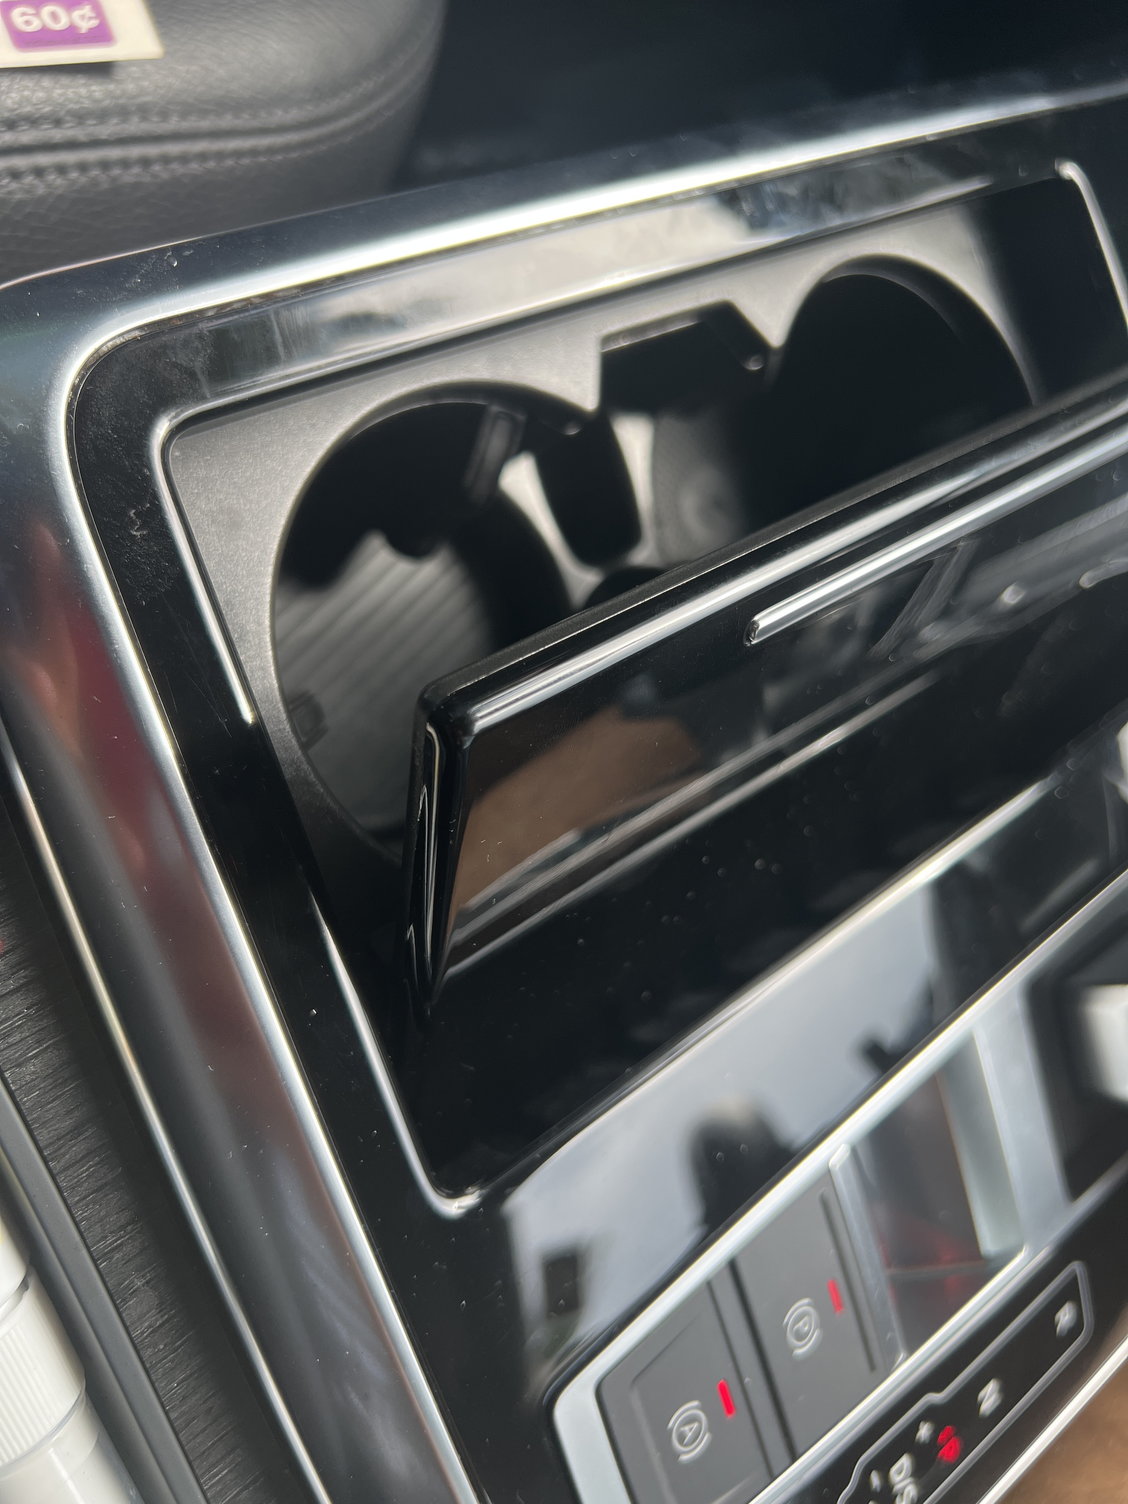 Cup holder cover stuck in open position -  Forums